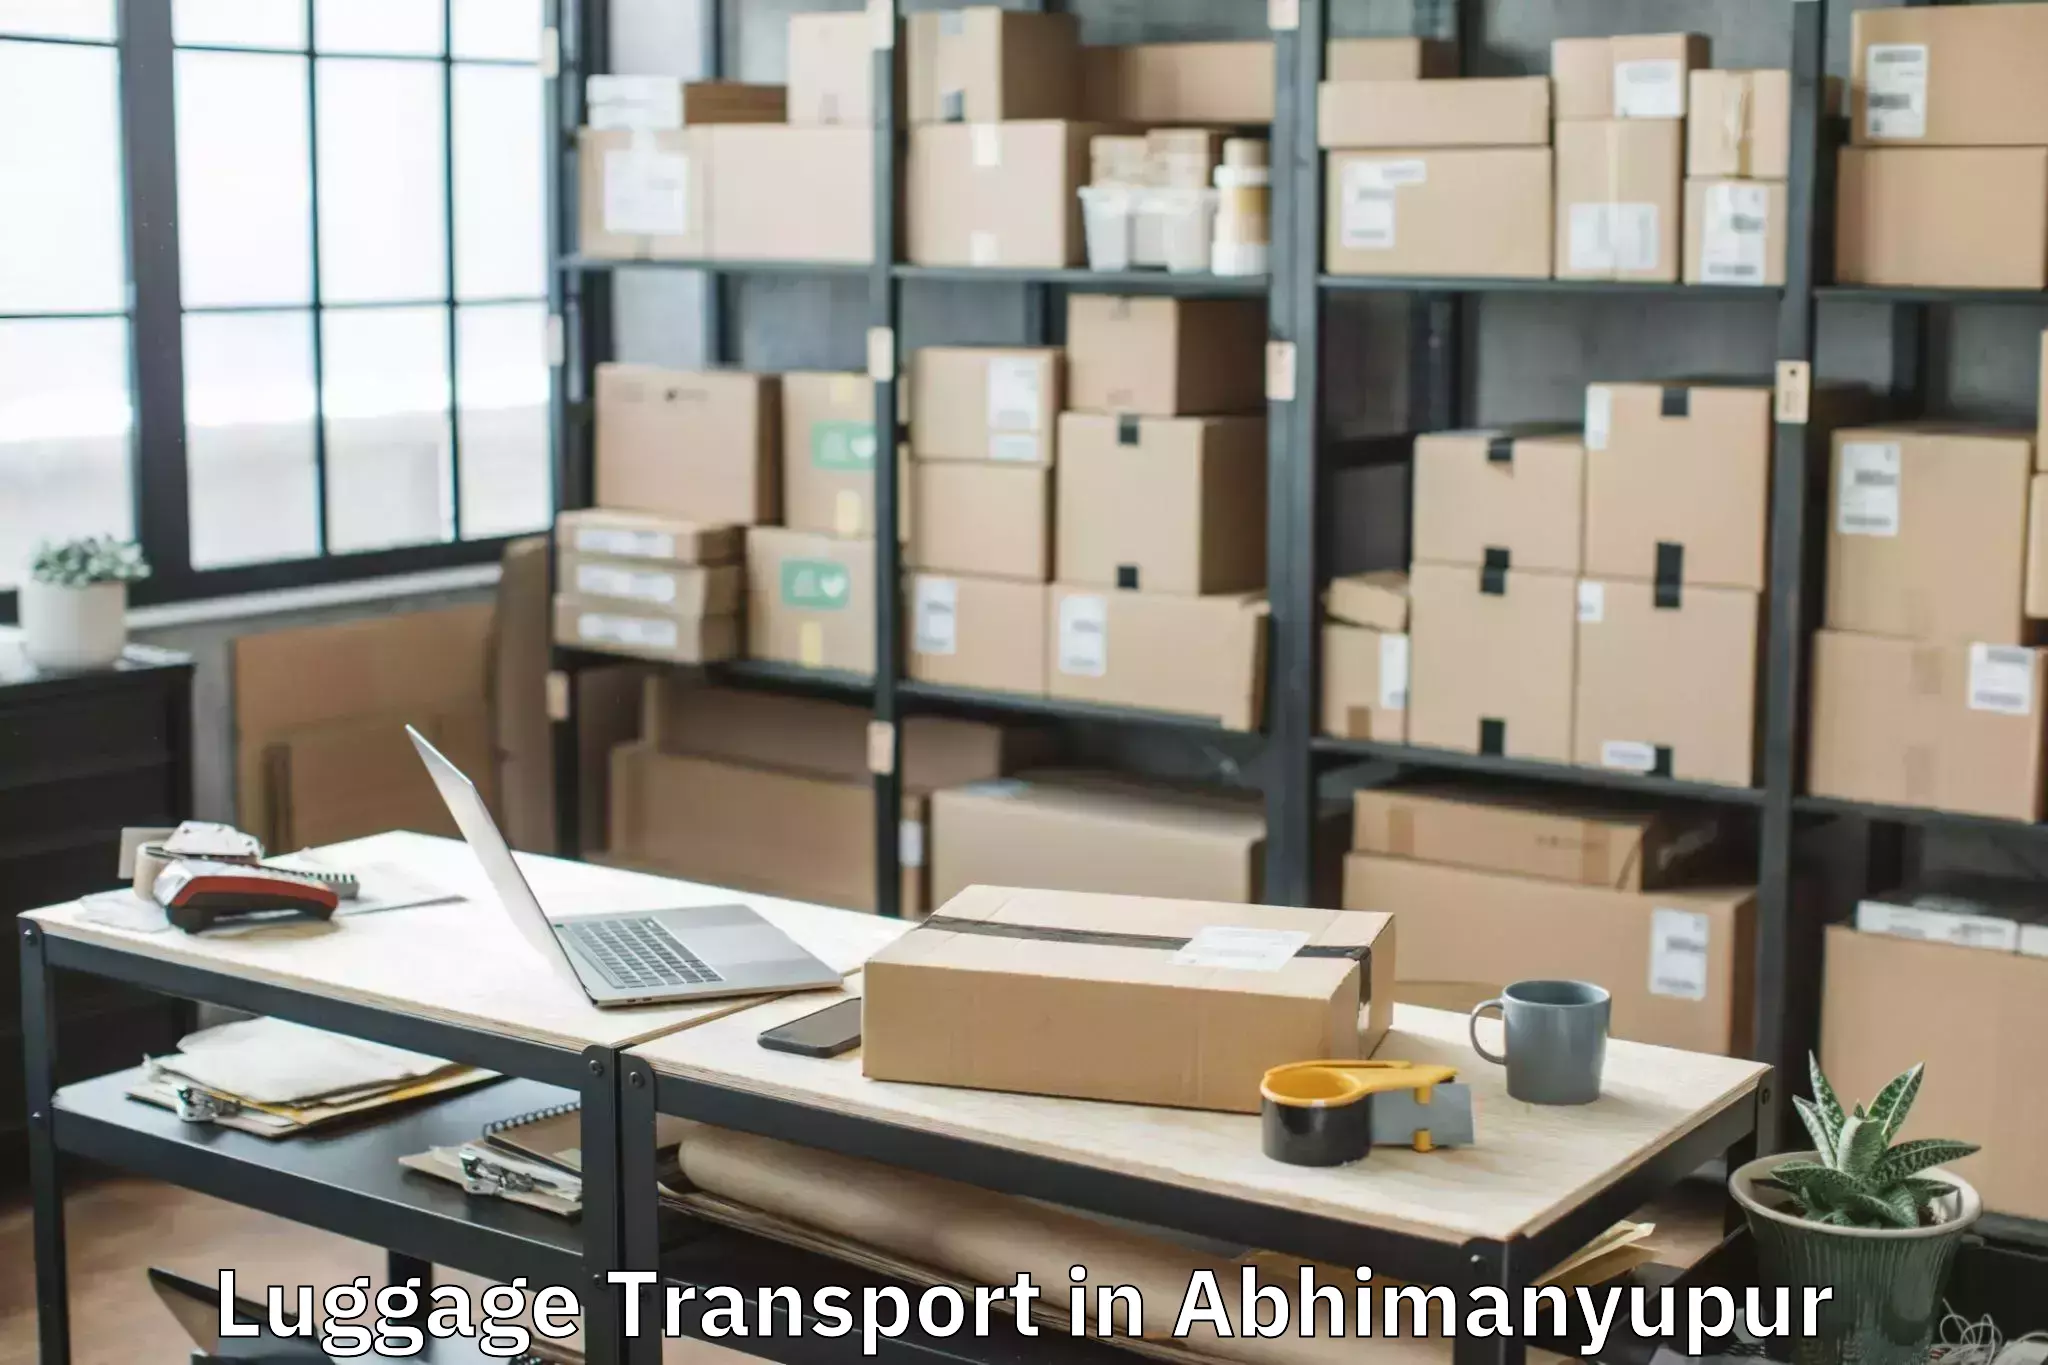 Baggage shipping schedule in Abhimanyupur